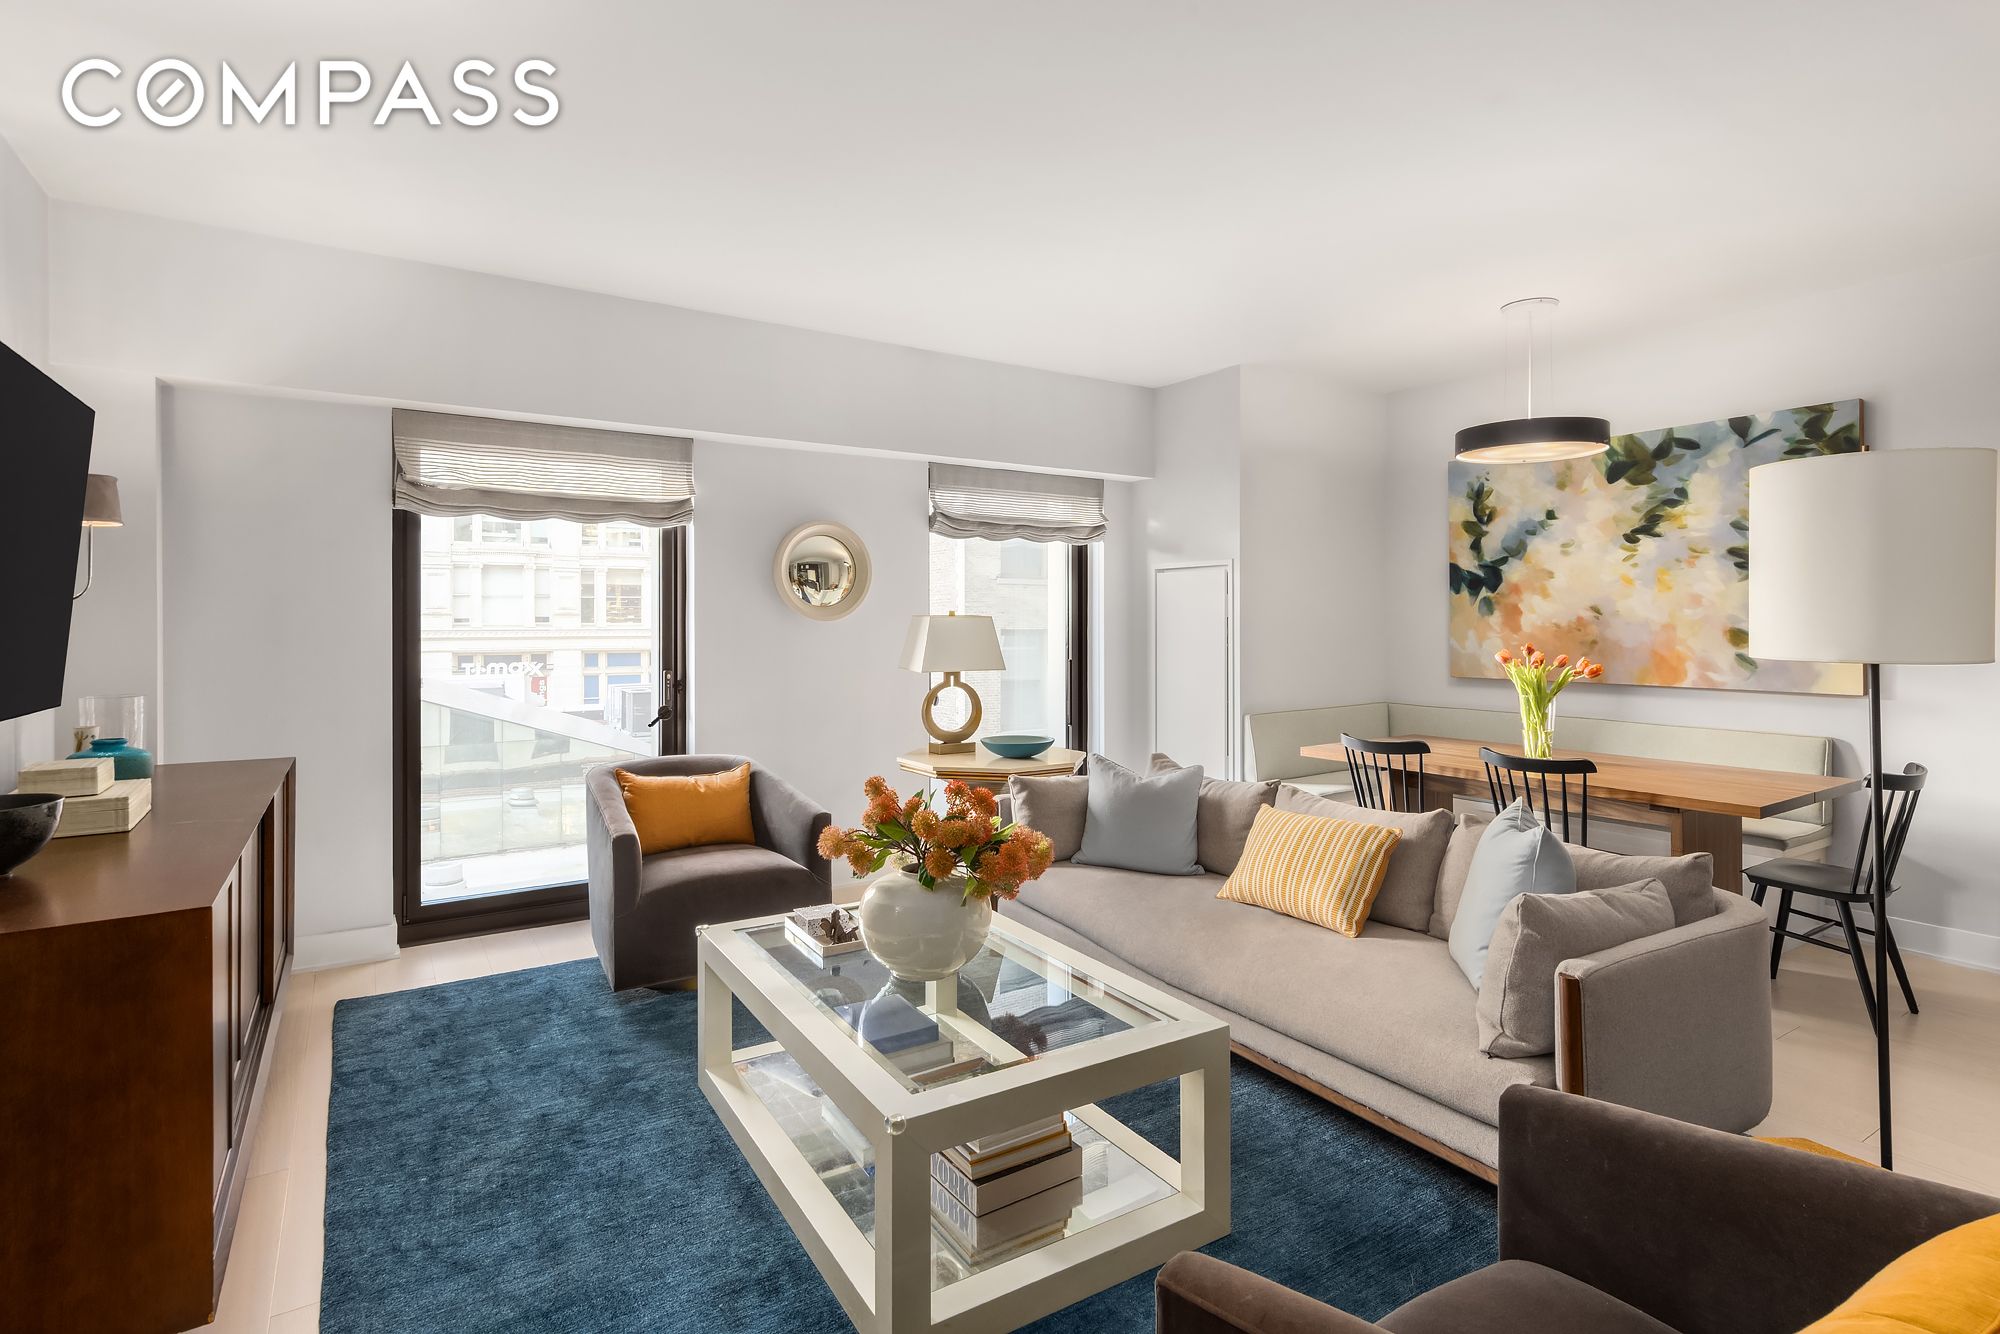 55 West 17th Street 504, Flatiron, Downtown, NYC - 3 Bedrooms  
2.5 Bathrooms  
4 Rooms - 